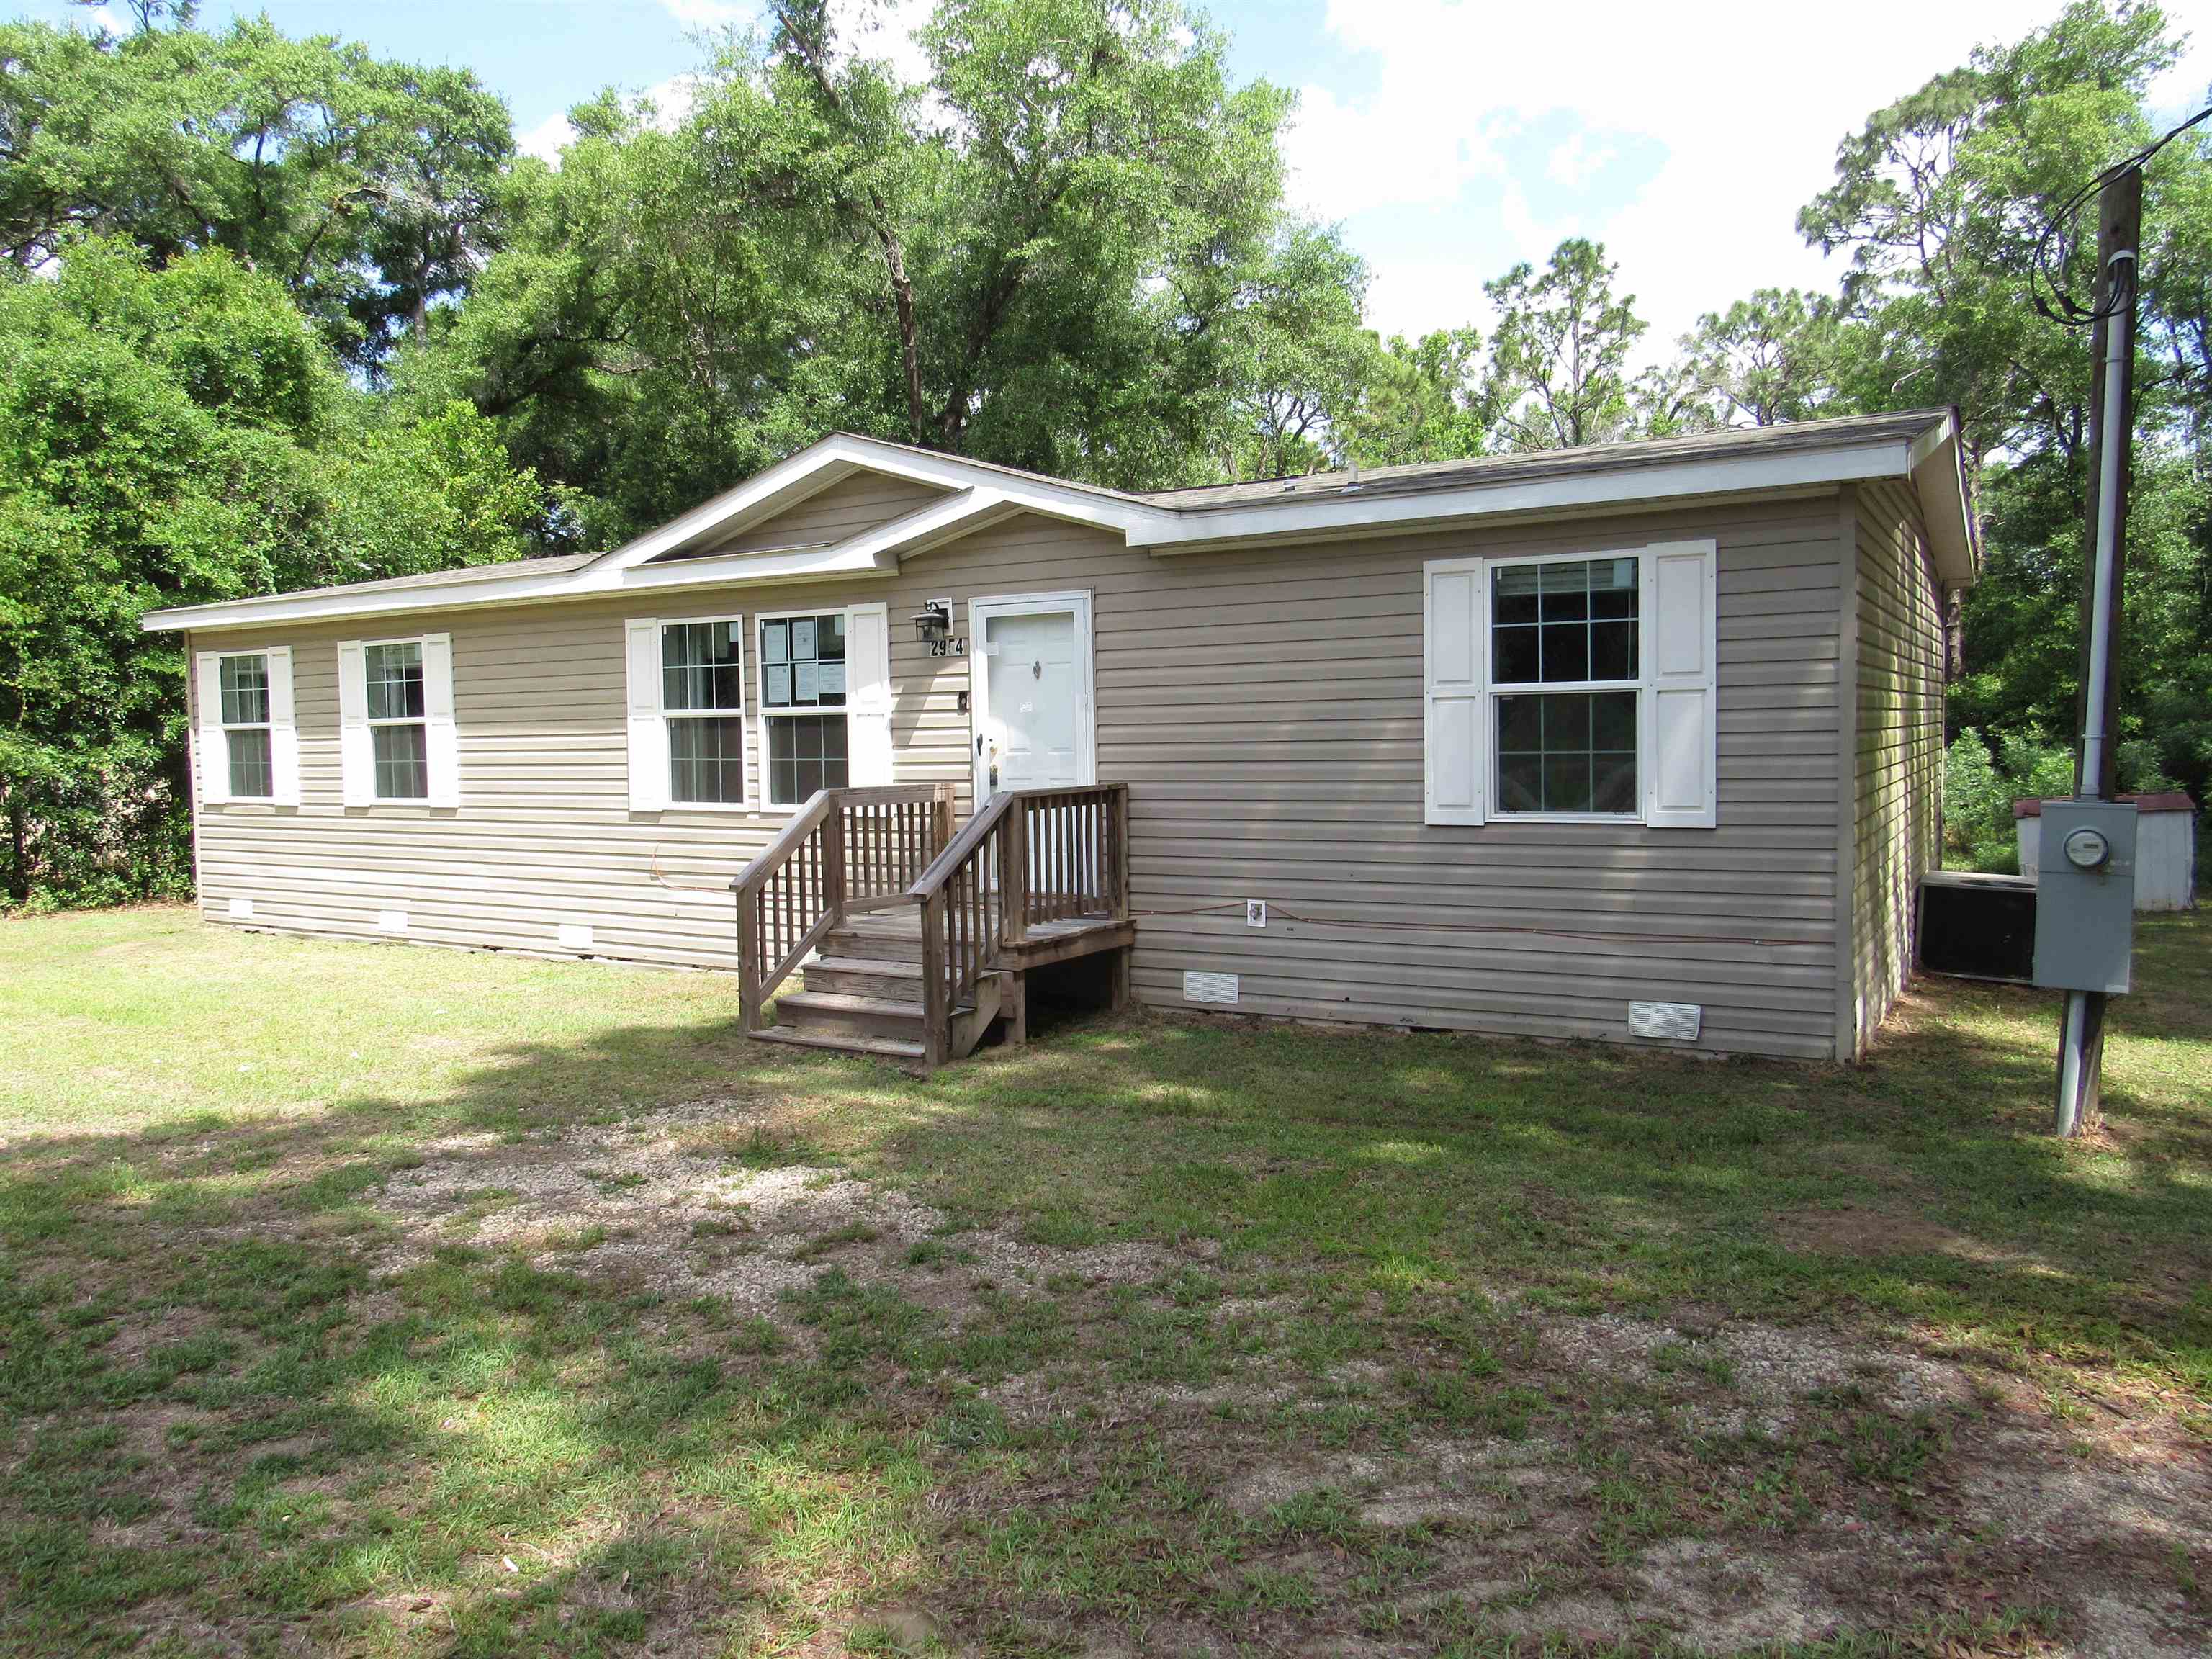 2954 Cathedral Drive,TALLAHASSEE,Florida 32310,3 Bedrooms Bedrooms,2 BathroomsBathrooms,Manuf/mobile home,2954 Cathedral Drive,358441